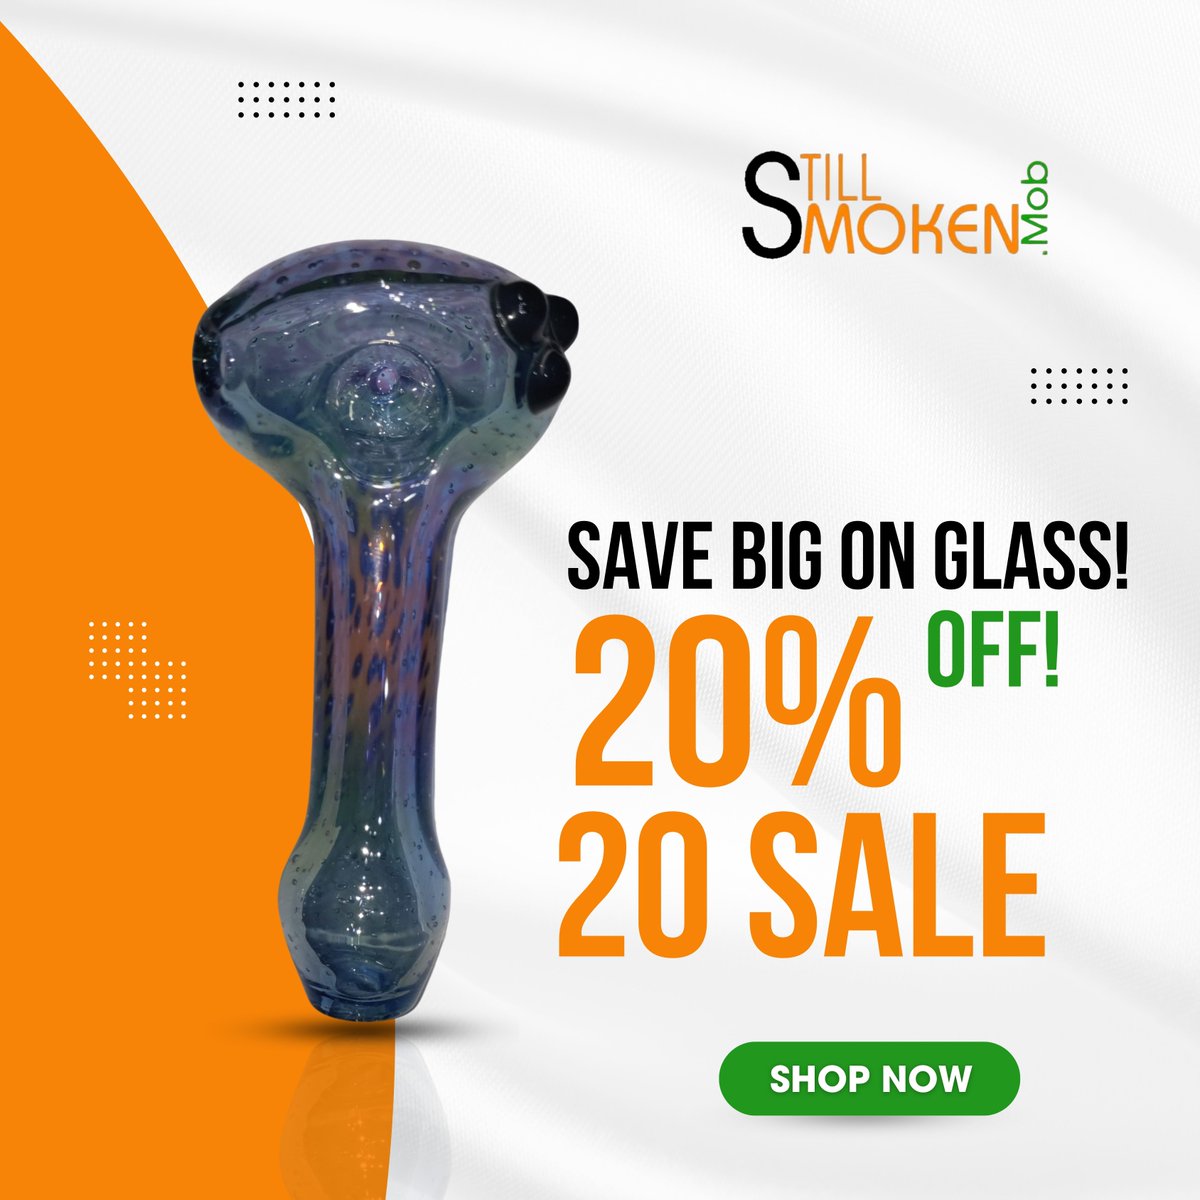 Elevate your smoking experience with our 420 sale! Enjoy a whopping 20% OFF on select glass pieces, including the GardenOfEden Fumed Spoon. But remember, reward points cannot be used on already discounted products. 

#420sale #glasspieces #smokingexperience #elevateyourexperience